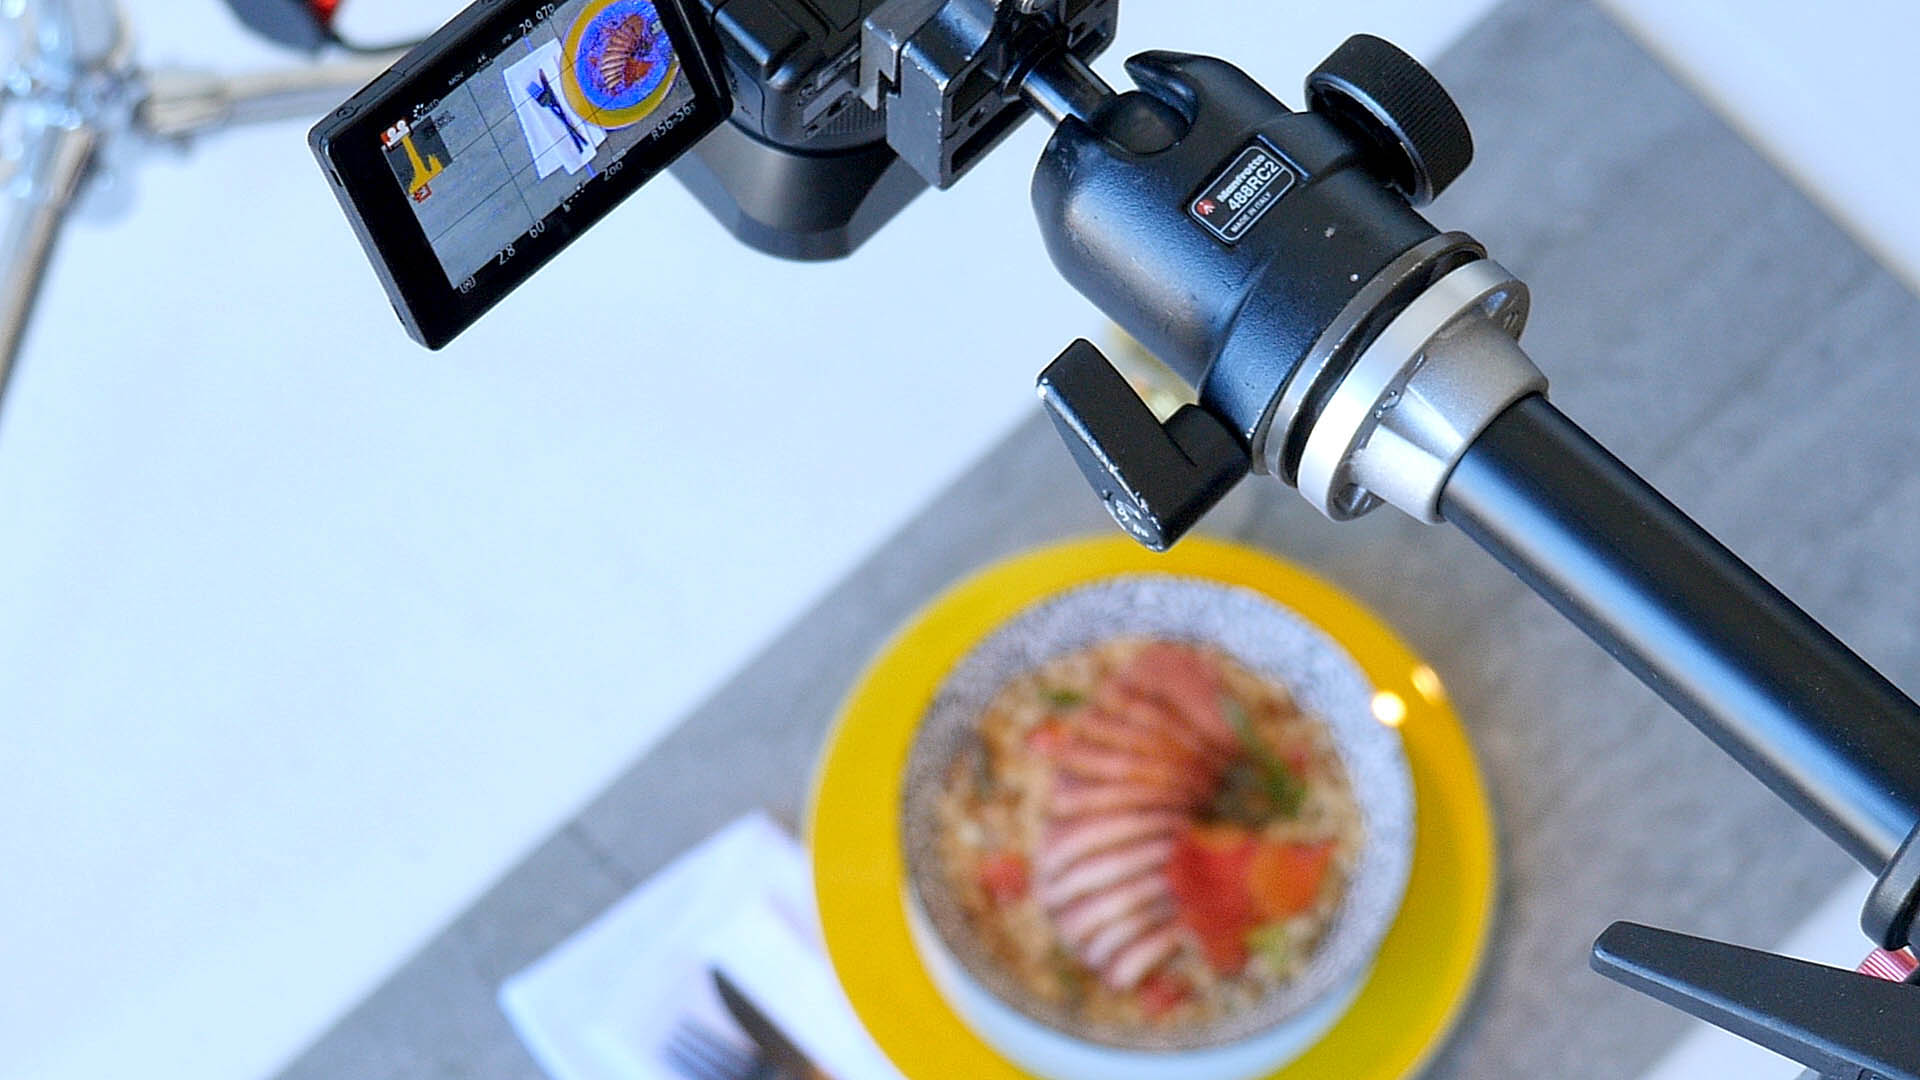 A frame grab photograph from the video Food & Camera Gear Behind the Scenes at a Food Photo Video Shoot at a Montreal Studio. The photograph shows a camera pointed down over a beautifully styled bowl of food. The bowl of food is visible in the LCD display on the camera. The camera is a Panasonic GH4 with a Panasonic 25mm f 1.4 lens. Original Food & Camera Gear Behind the Scenes at a Food Photo Video Shoot at a Montreal Studio video posted here https://www.youtube.com/watch?v=Fz8r8y5M-uc